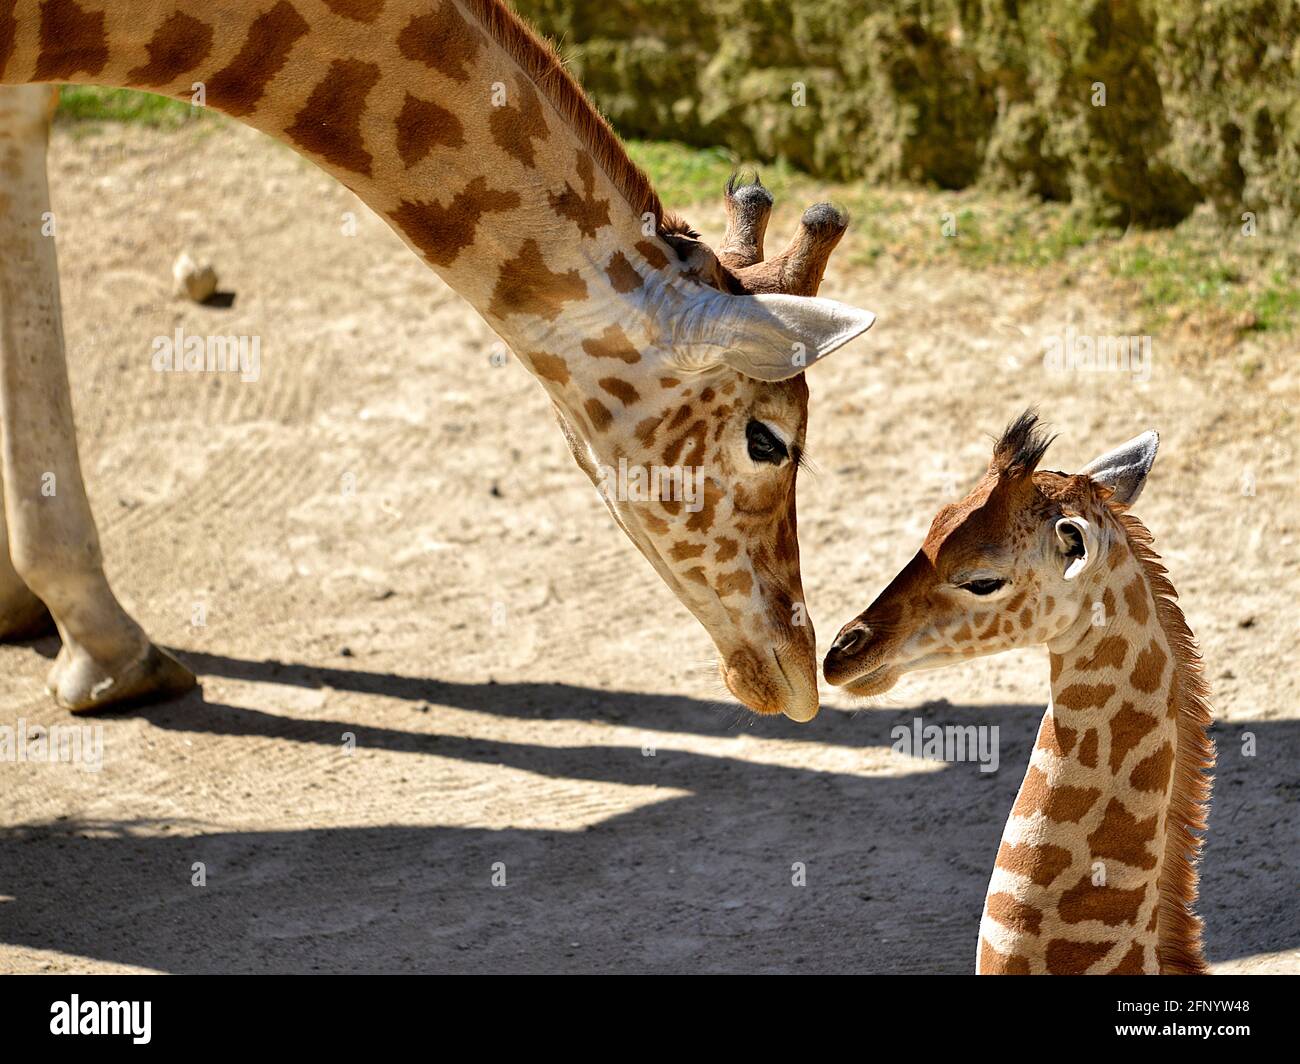 Closeup giraffe (Giraffa camelopardalis) on the ground with its baby seen from profile Stock Photo